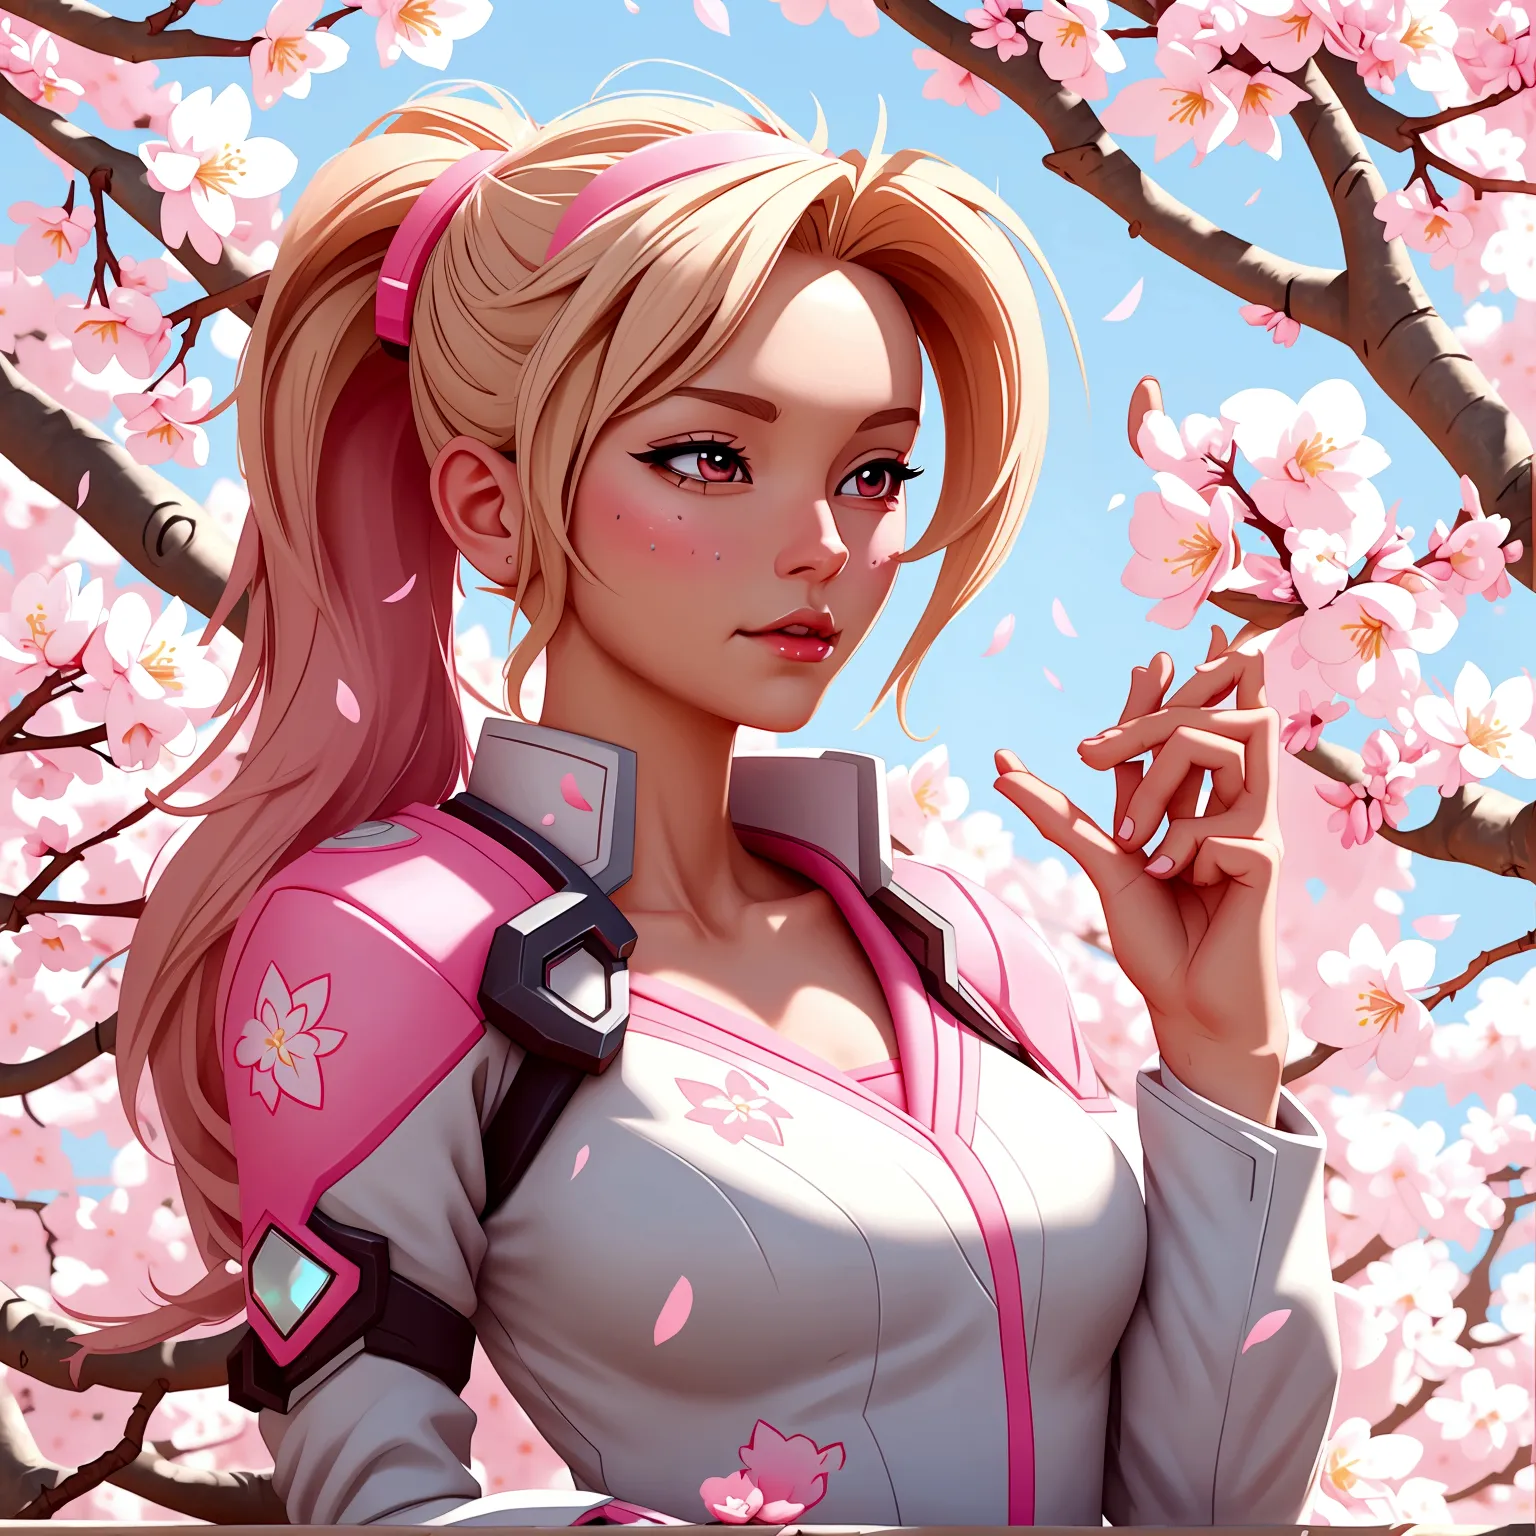 Pink mercy from overwatch surrounded by cherry blossoms